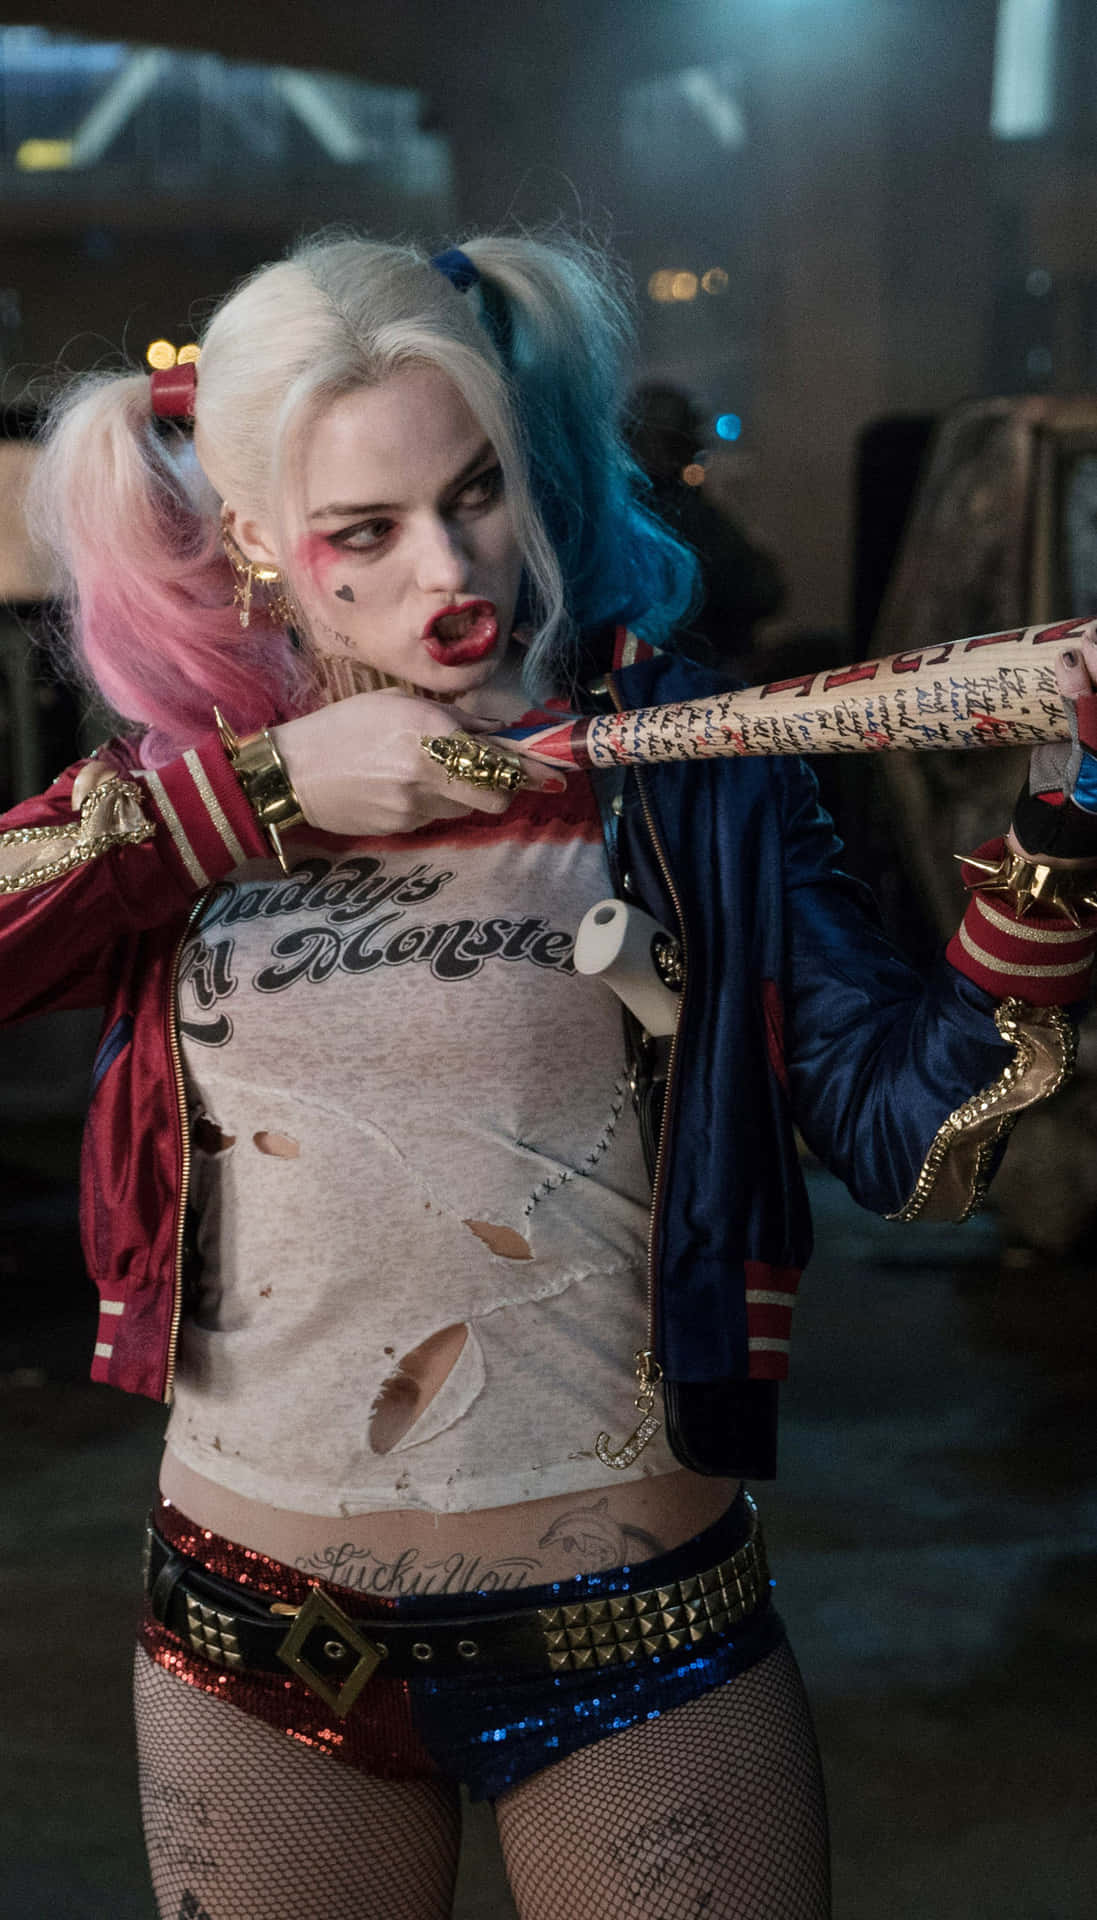 harley quinn in a costume holding a bat Wallpaper